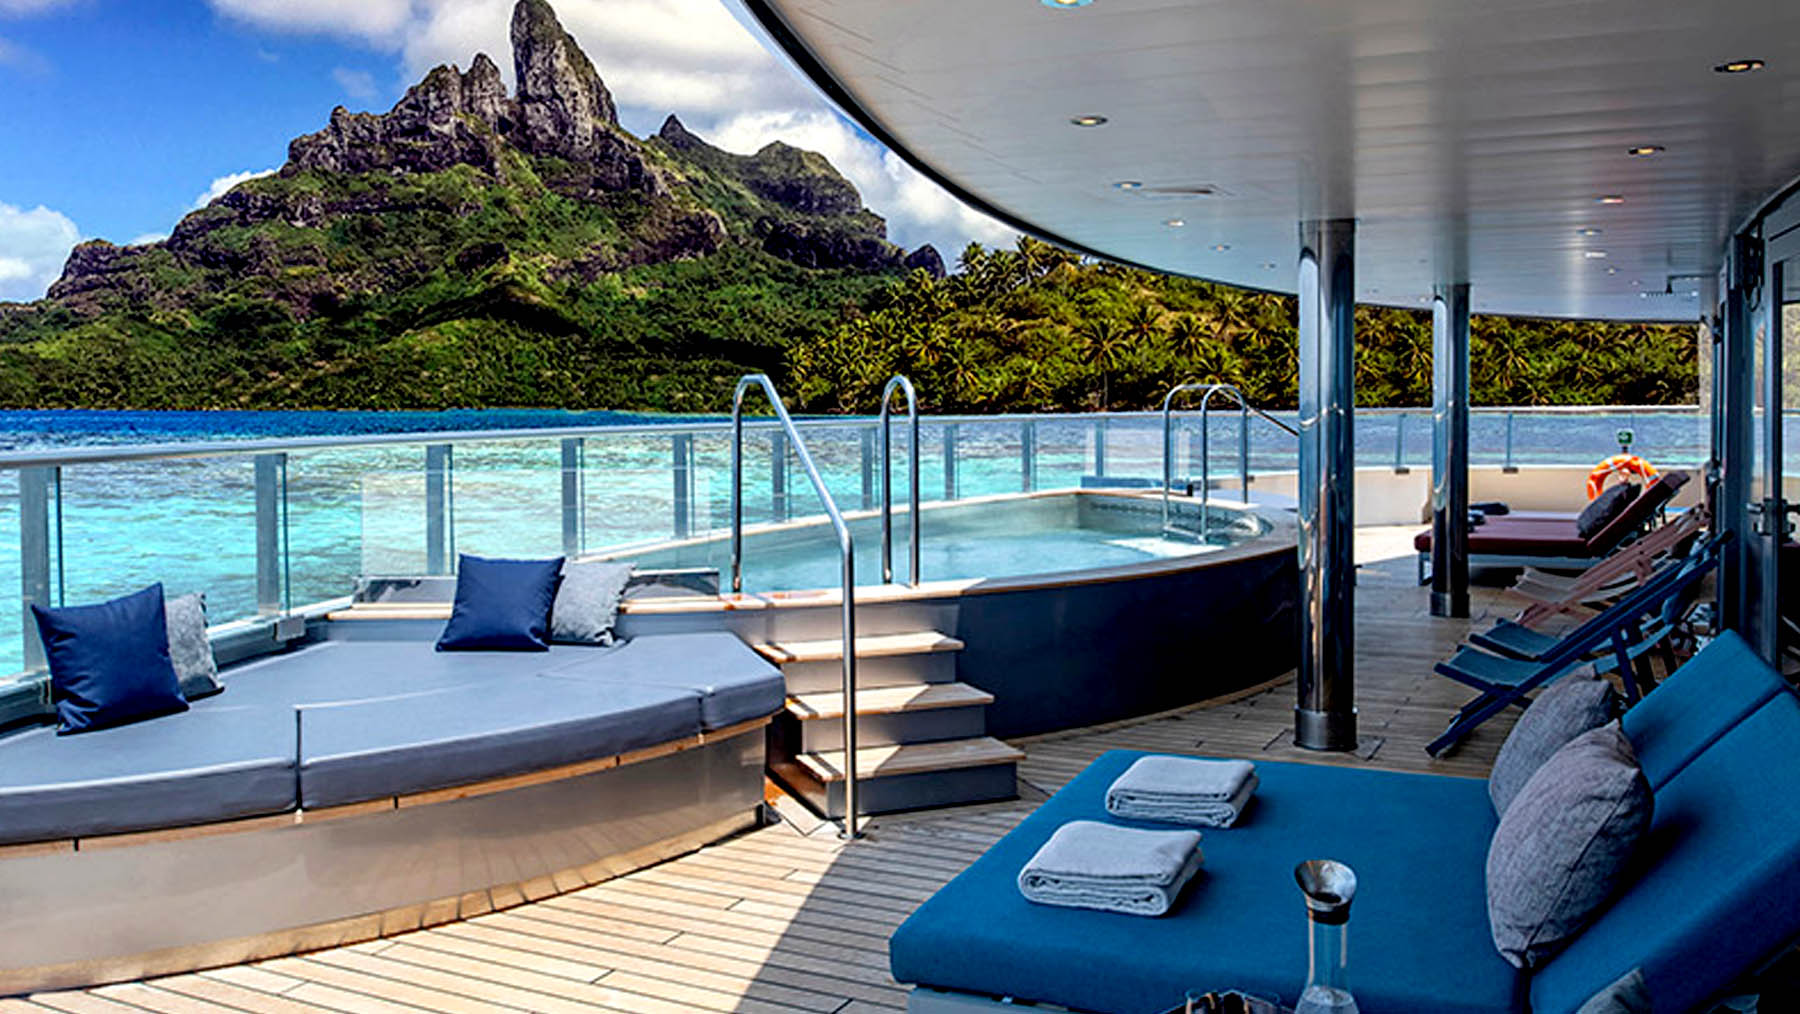 Scenic Spa Deck awaits cruisers as part of their onboard itineraries in their Australian and South Pacific cruise. 